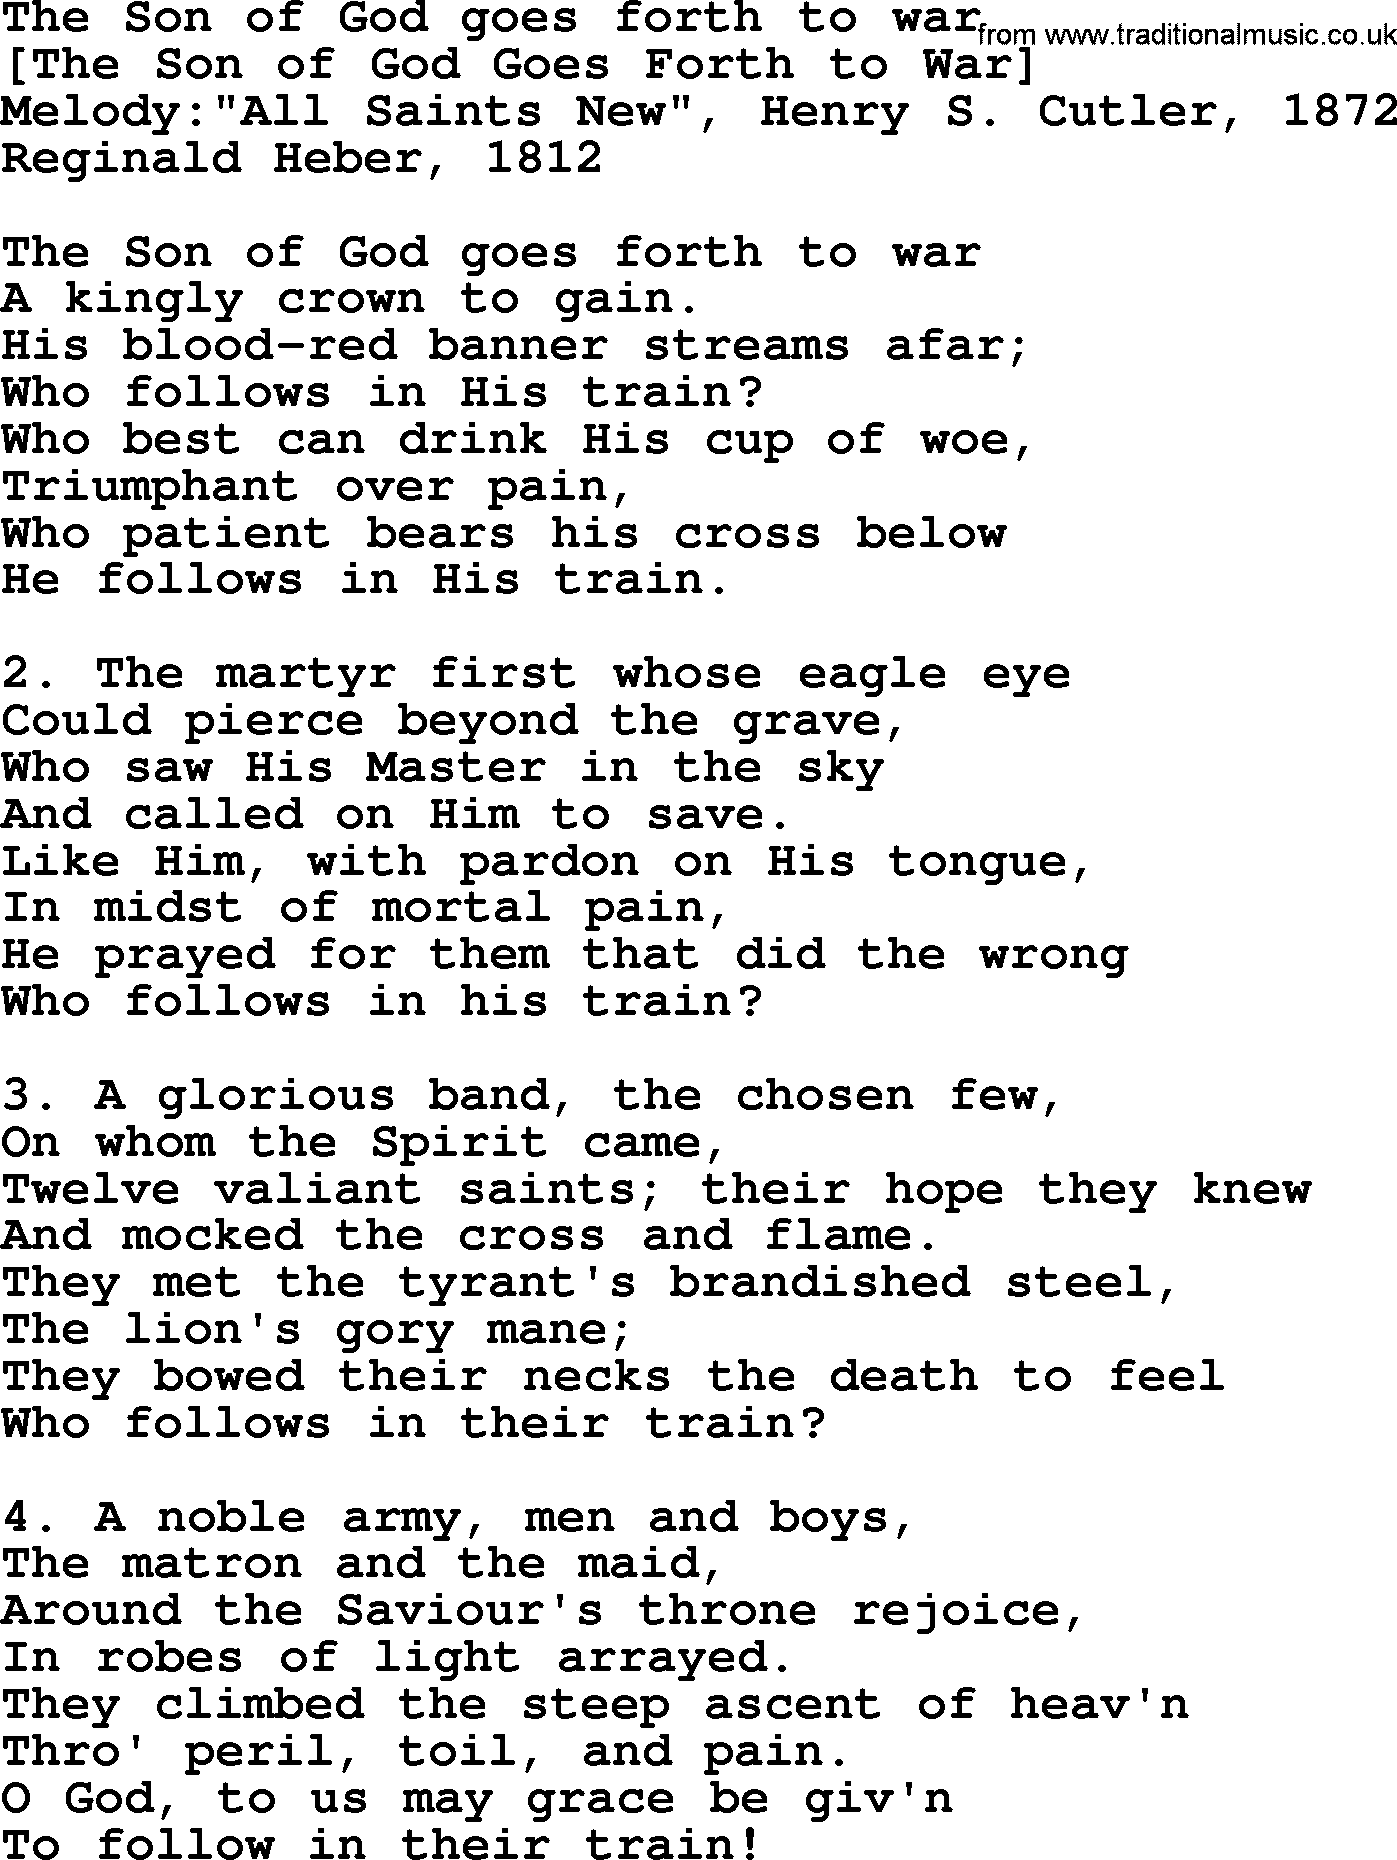 Old English Song: The Son Of God Goes Forth To War lyrics